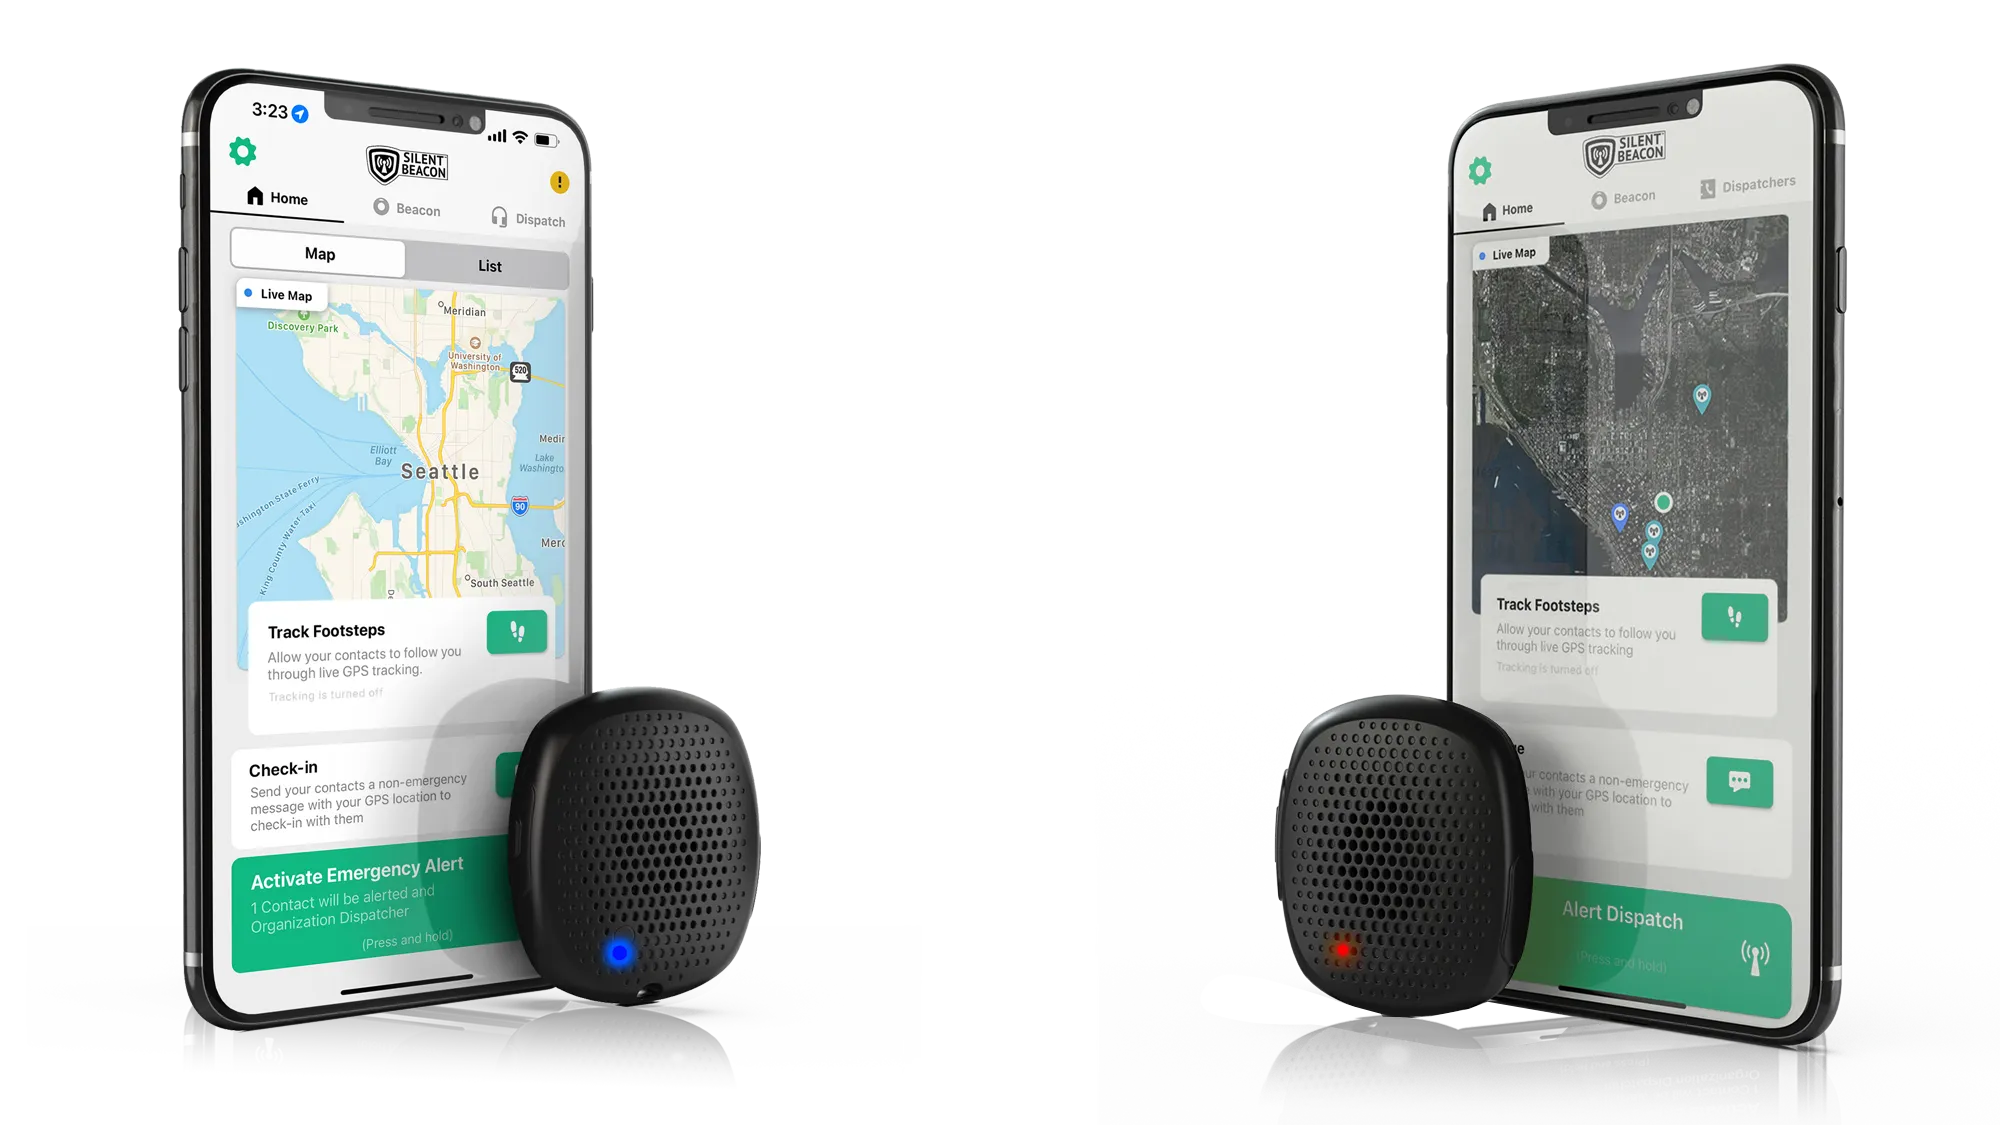 Two phones with Silent Beacon devices sitting on front. The Phones show the Silent Beacon App with the Map Screen open.